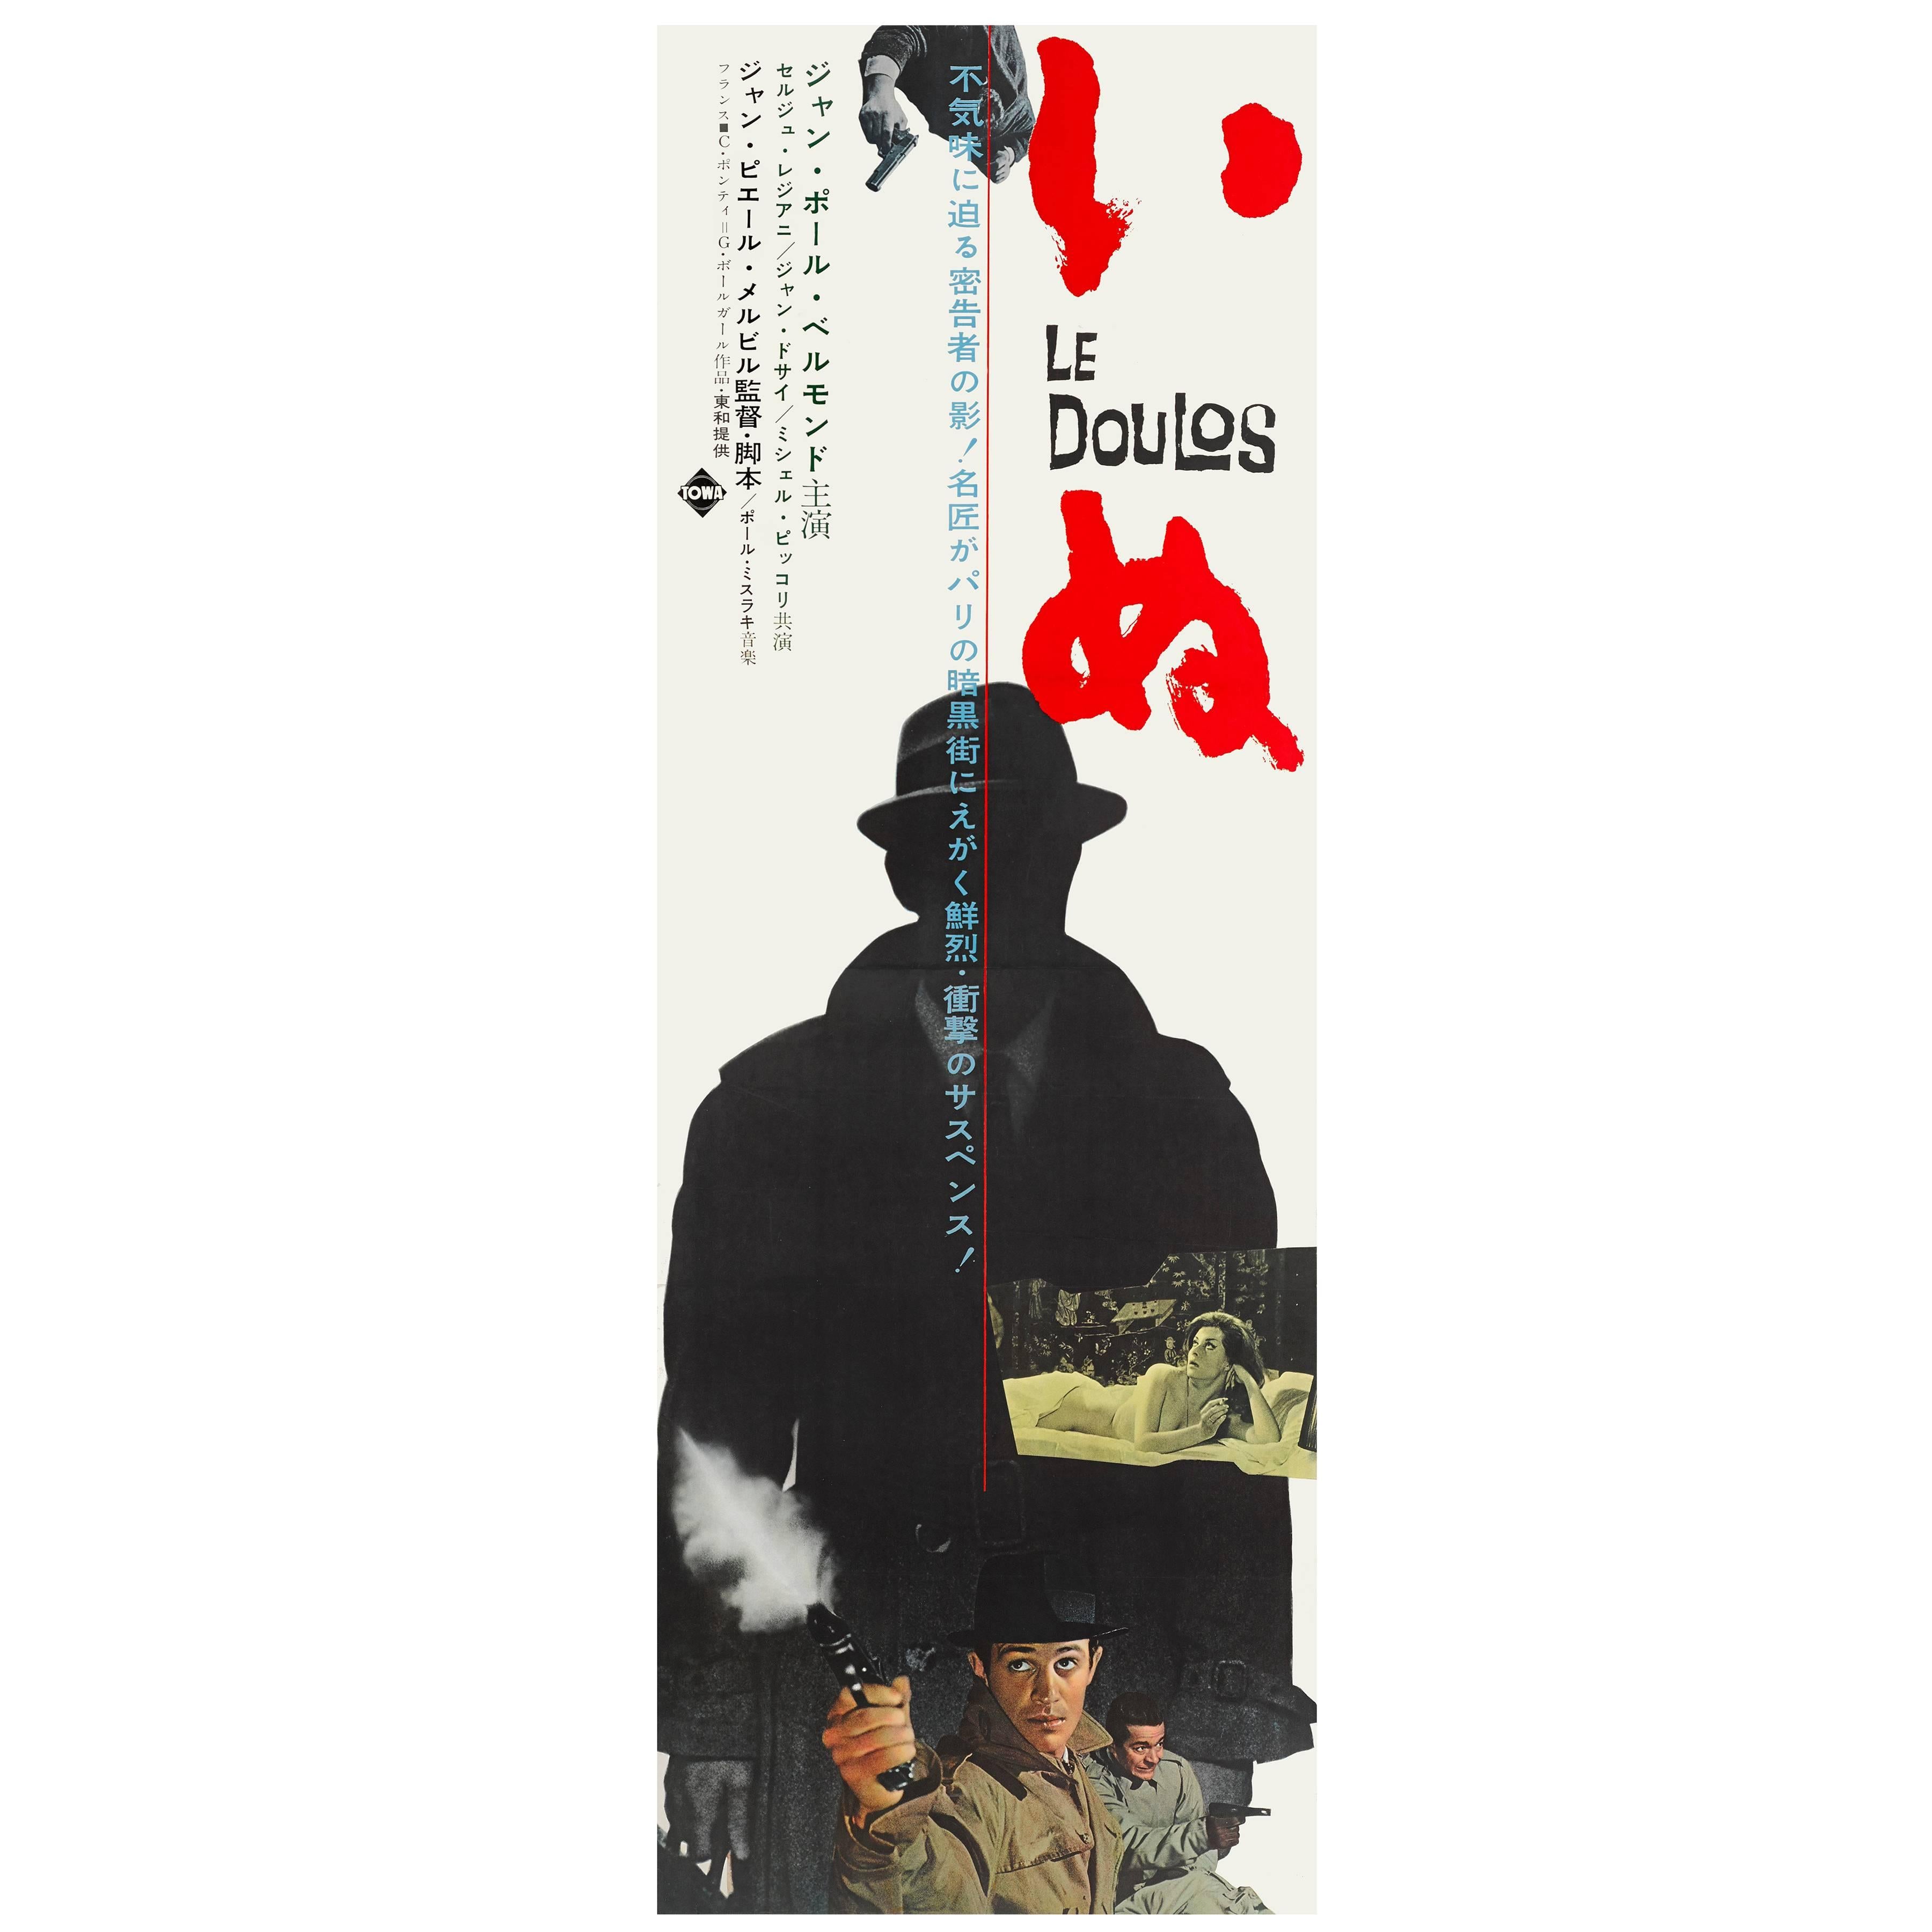 "Le Doulos" Original Japanese Film Poster